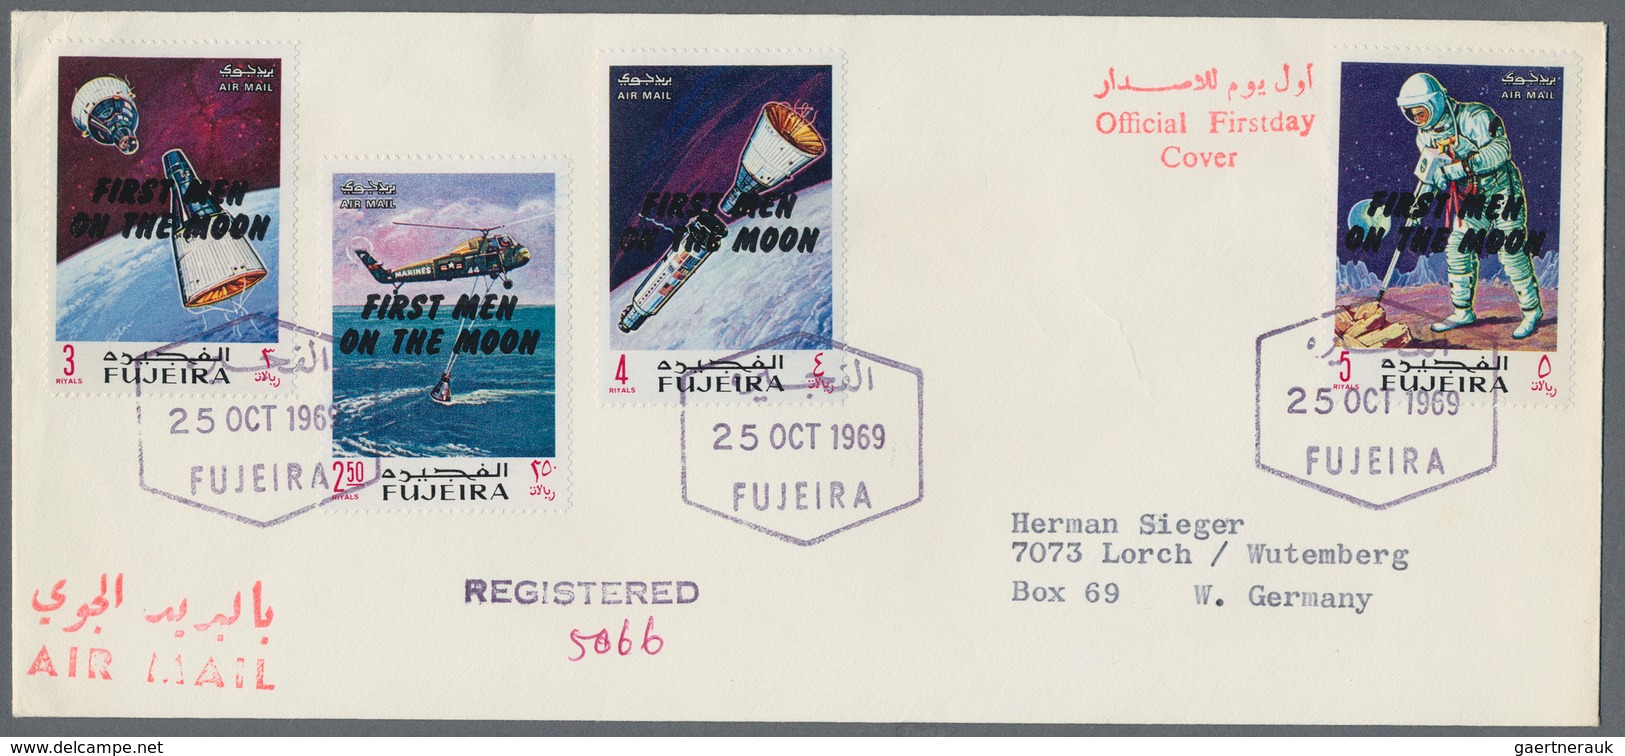 Fudschaira / Fujeira: 1969, APOLLO, group of 18 covers: Michel nos. 399/407 A and A 399/407 A on fou